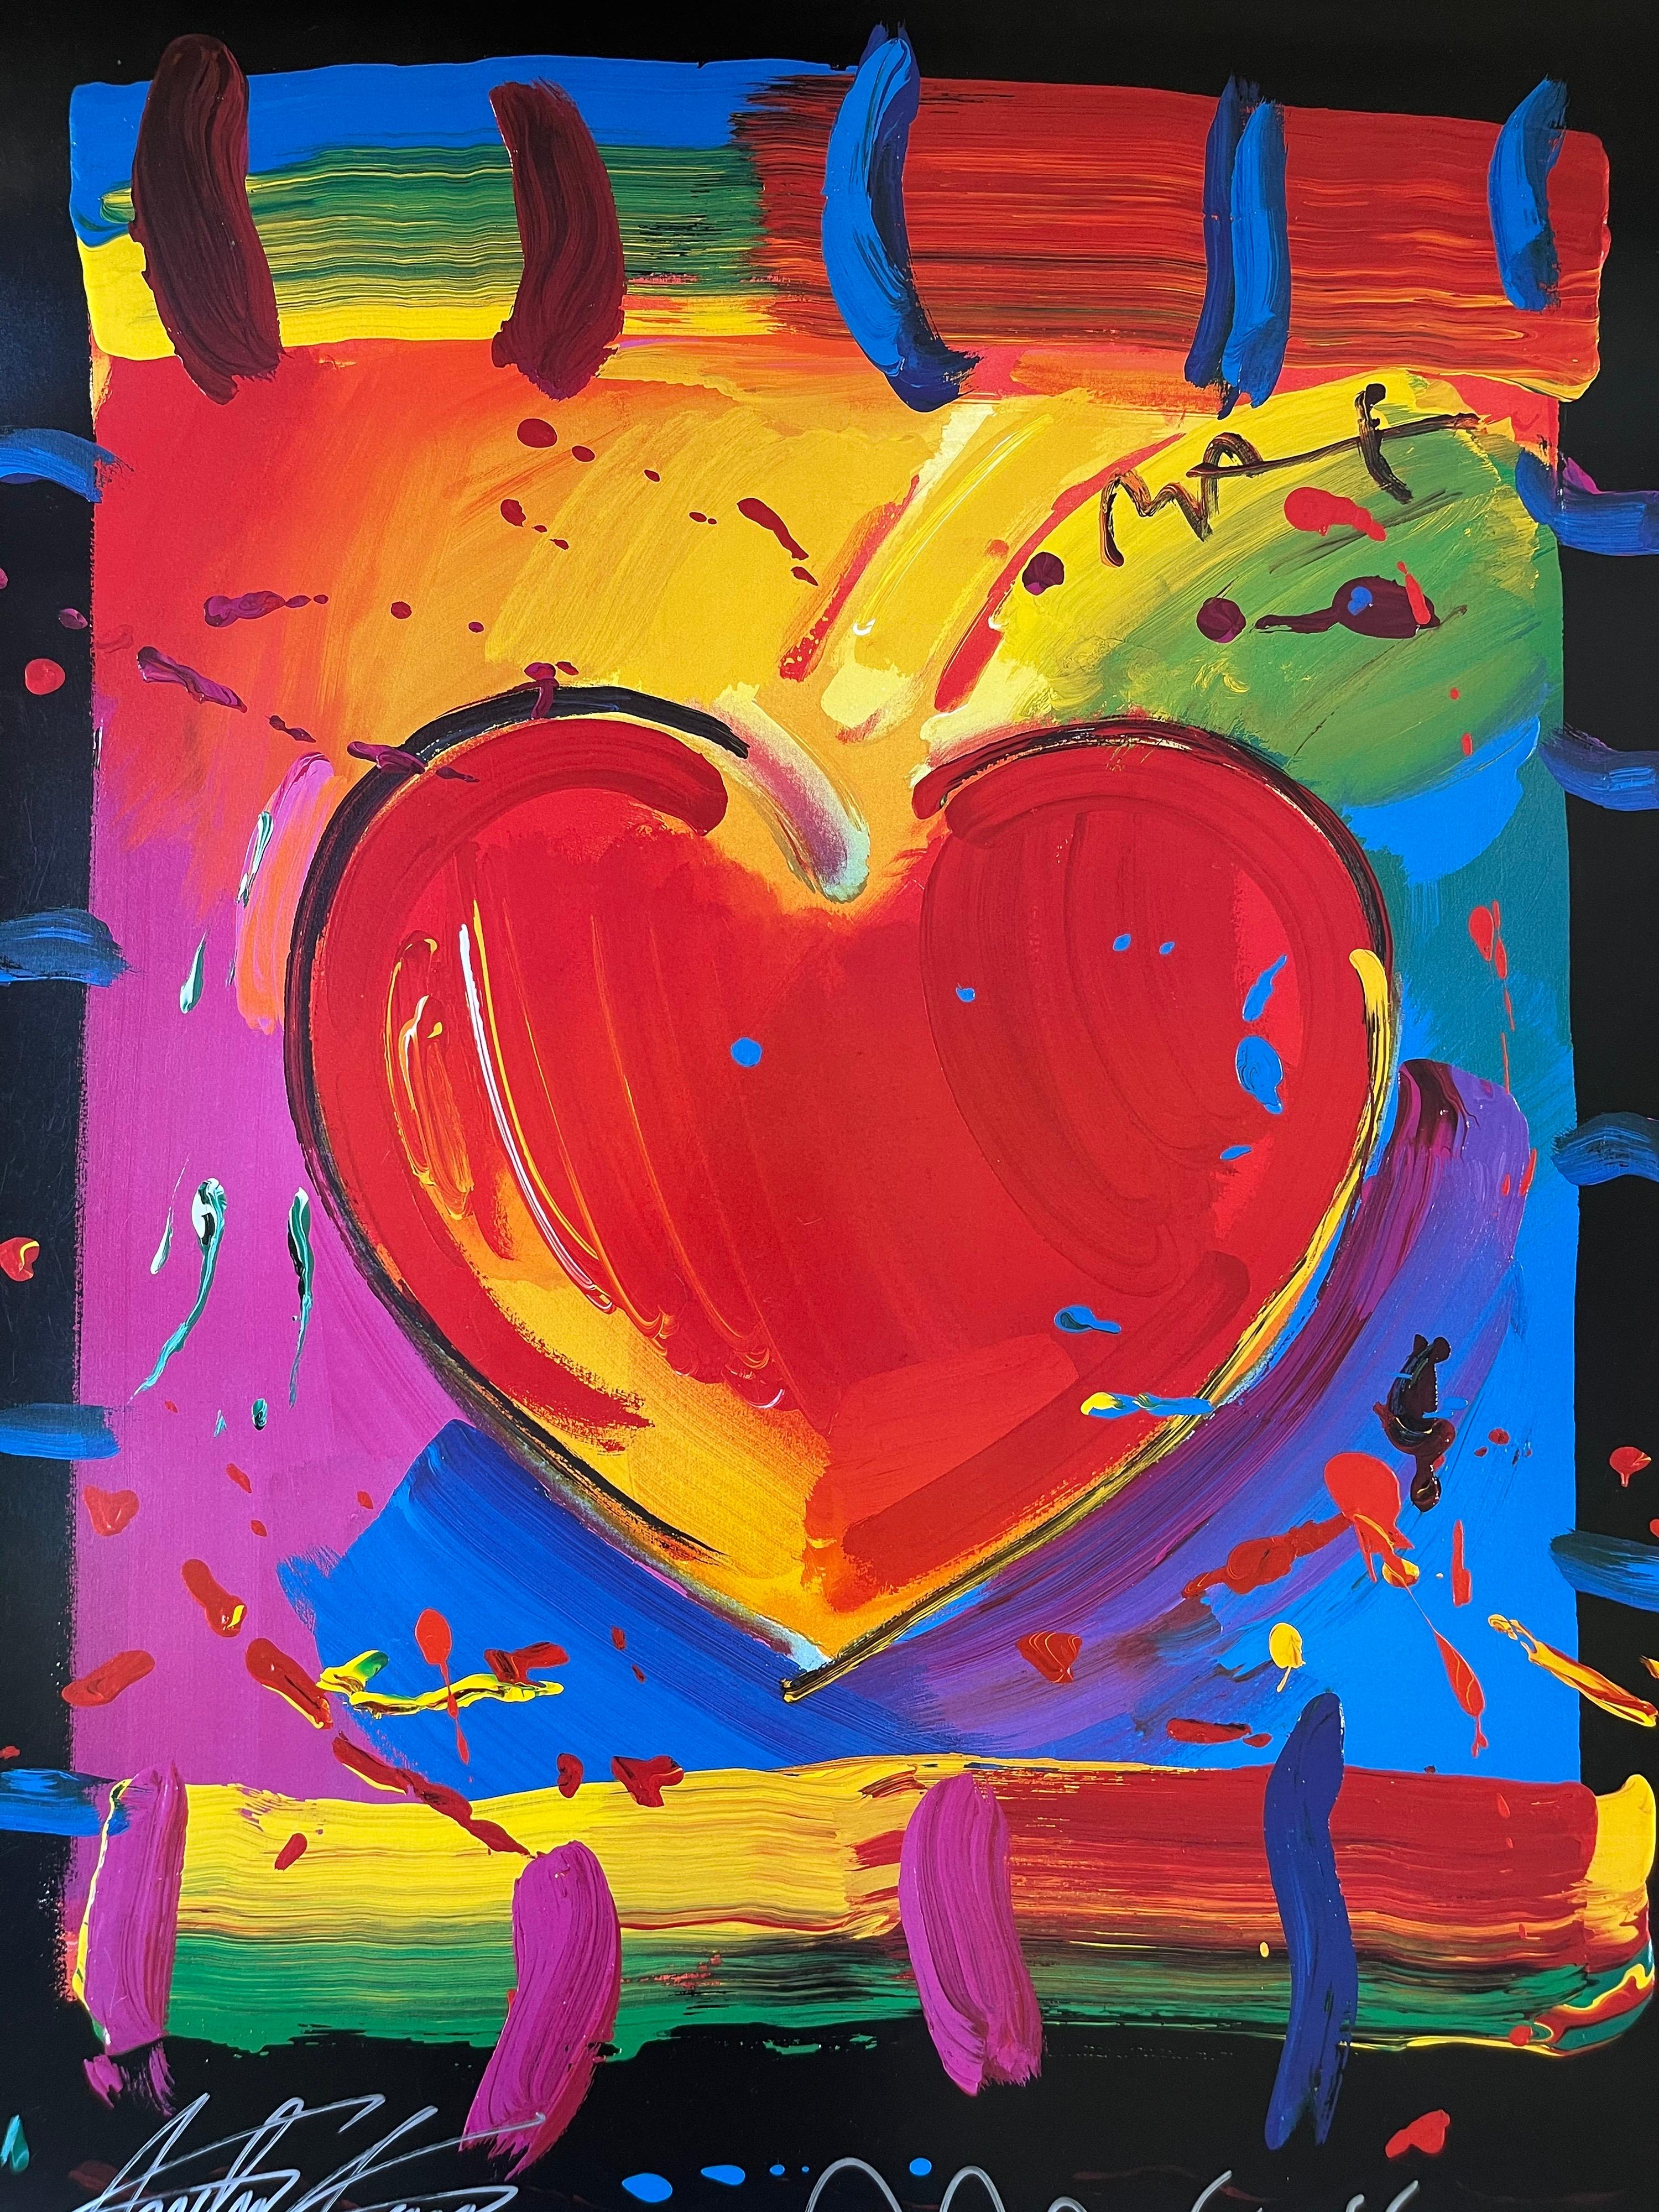 Expressionist Heart Poster Signed by Peter Max & Andre Agassi For Sale